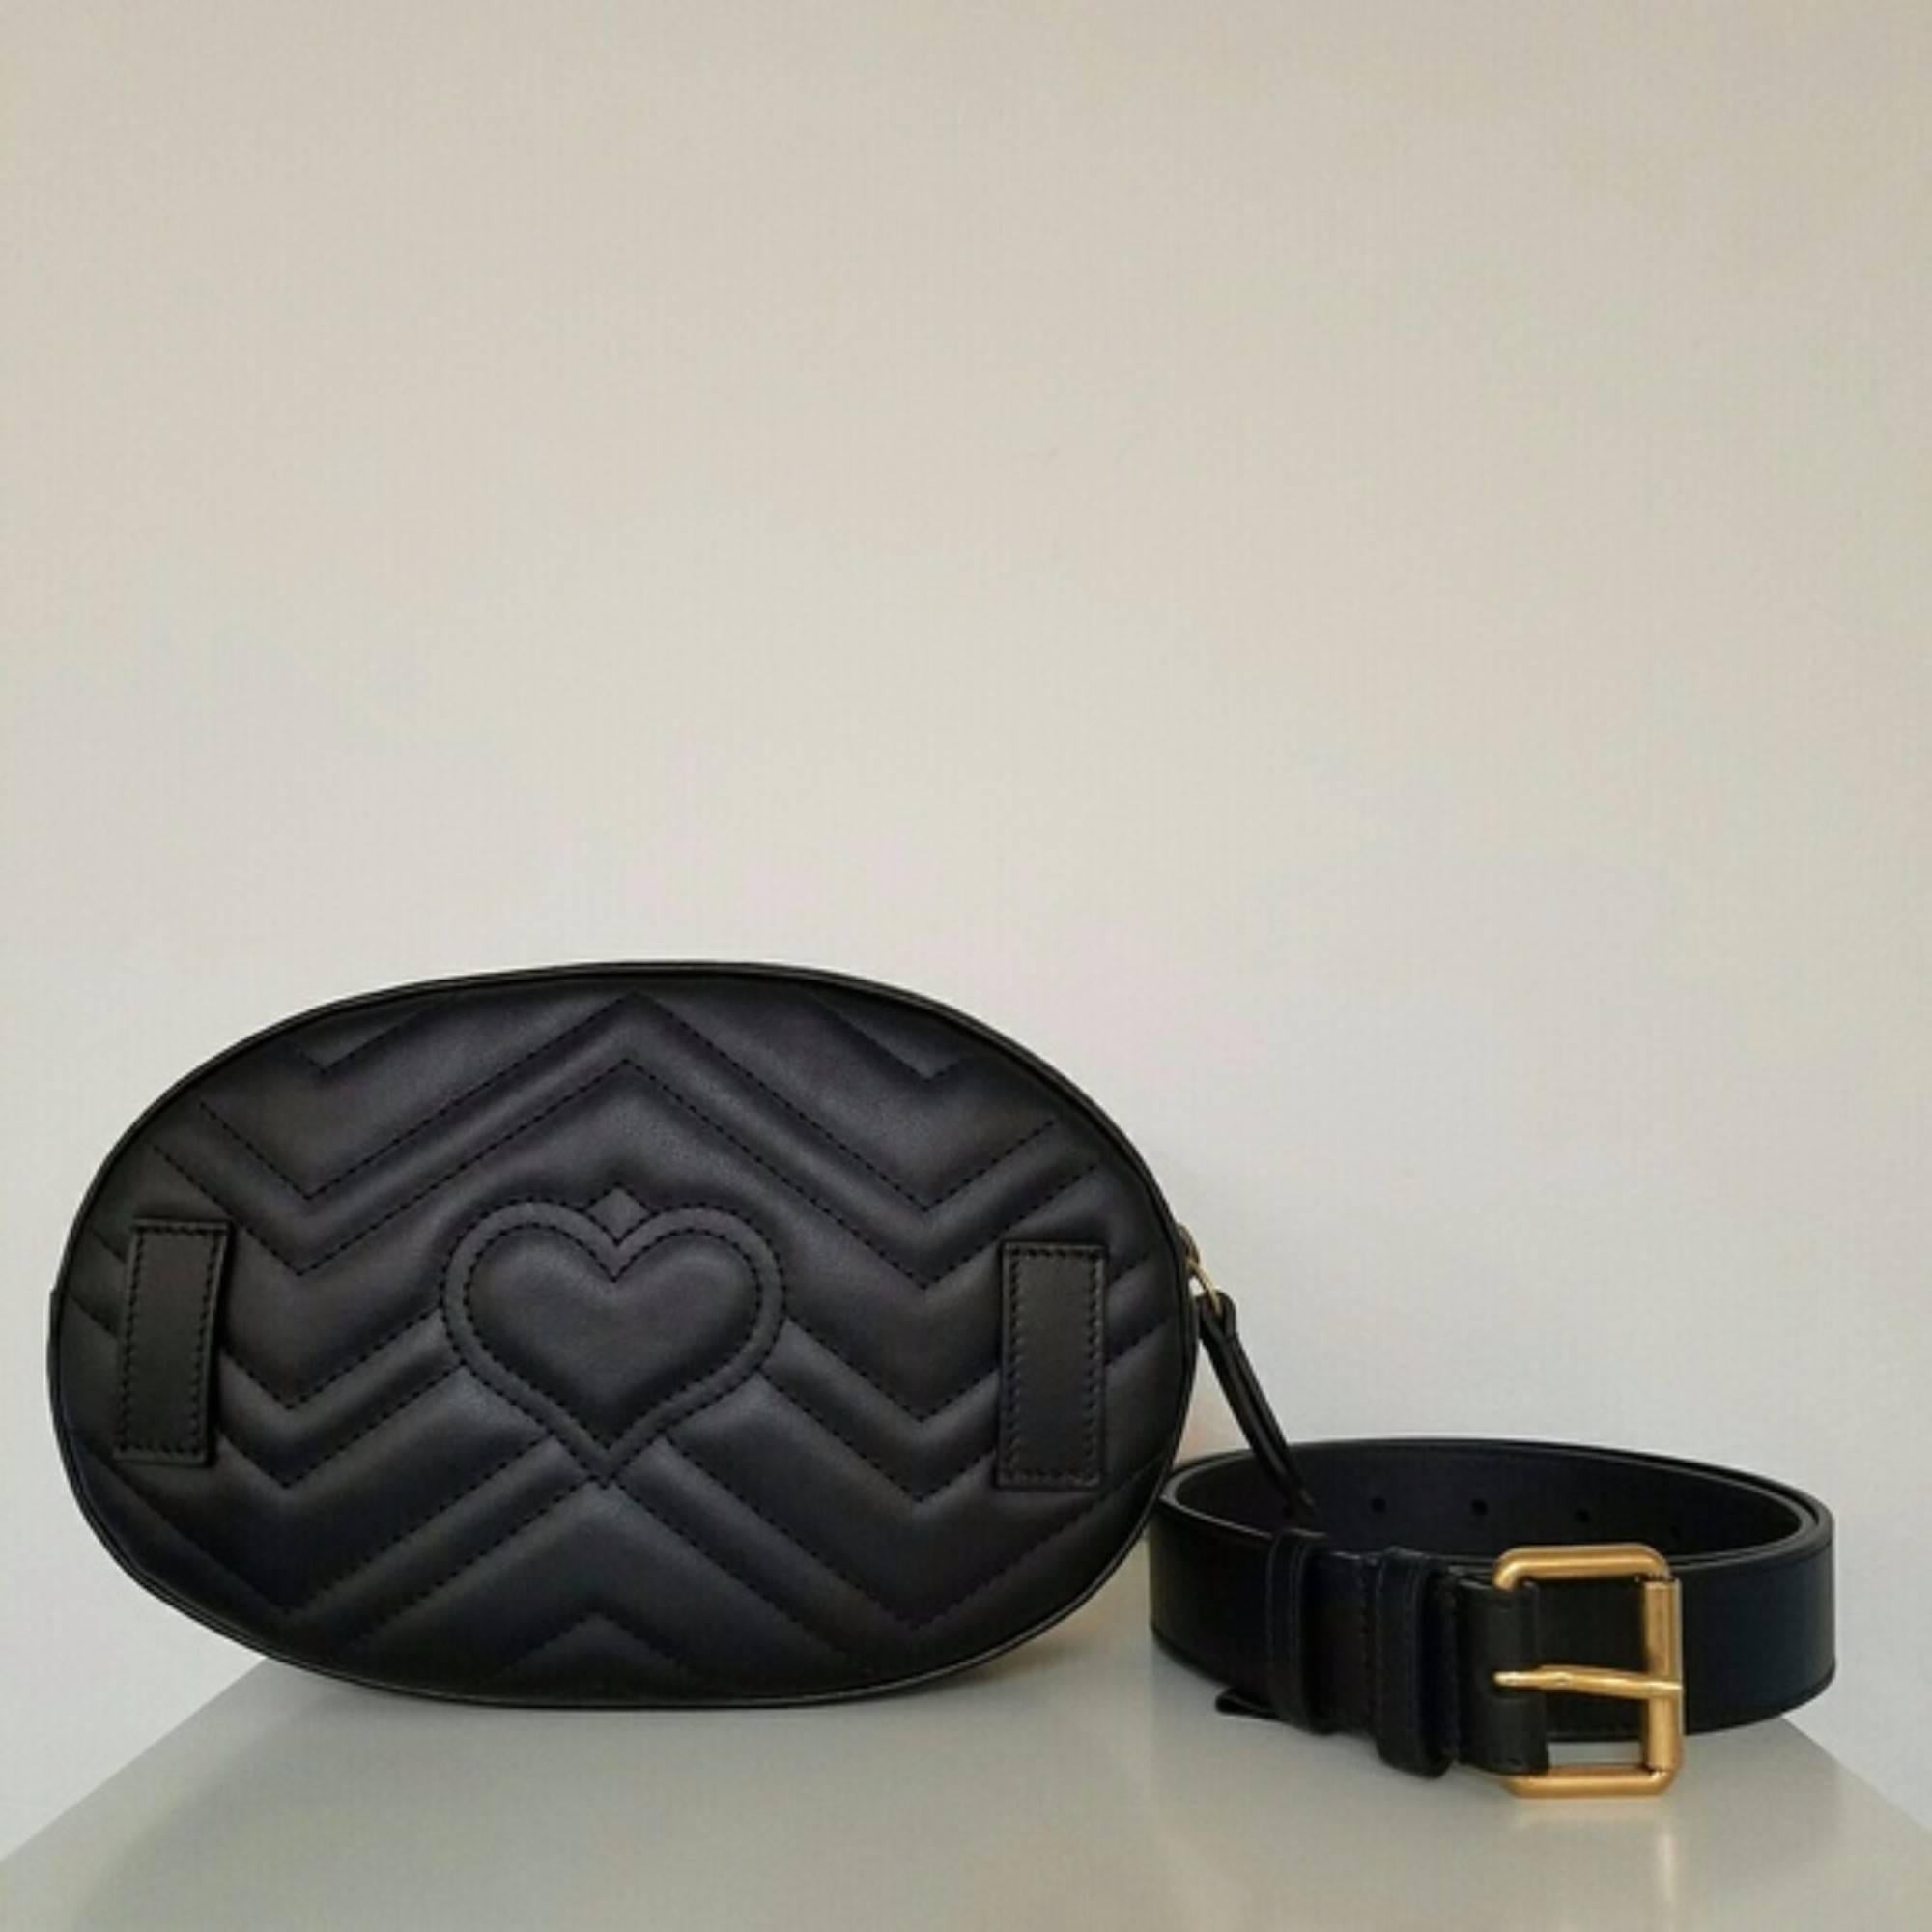 Gucci Matelasse Marmont Belt Bag (Black, Size - OS)
Brand new with cards and dustbag.